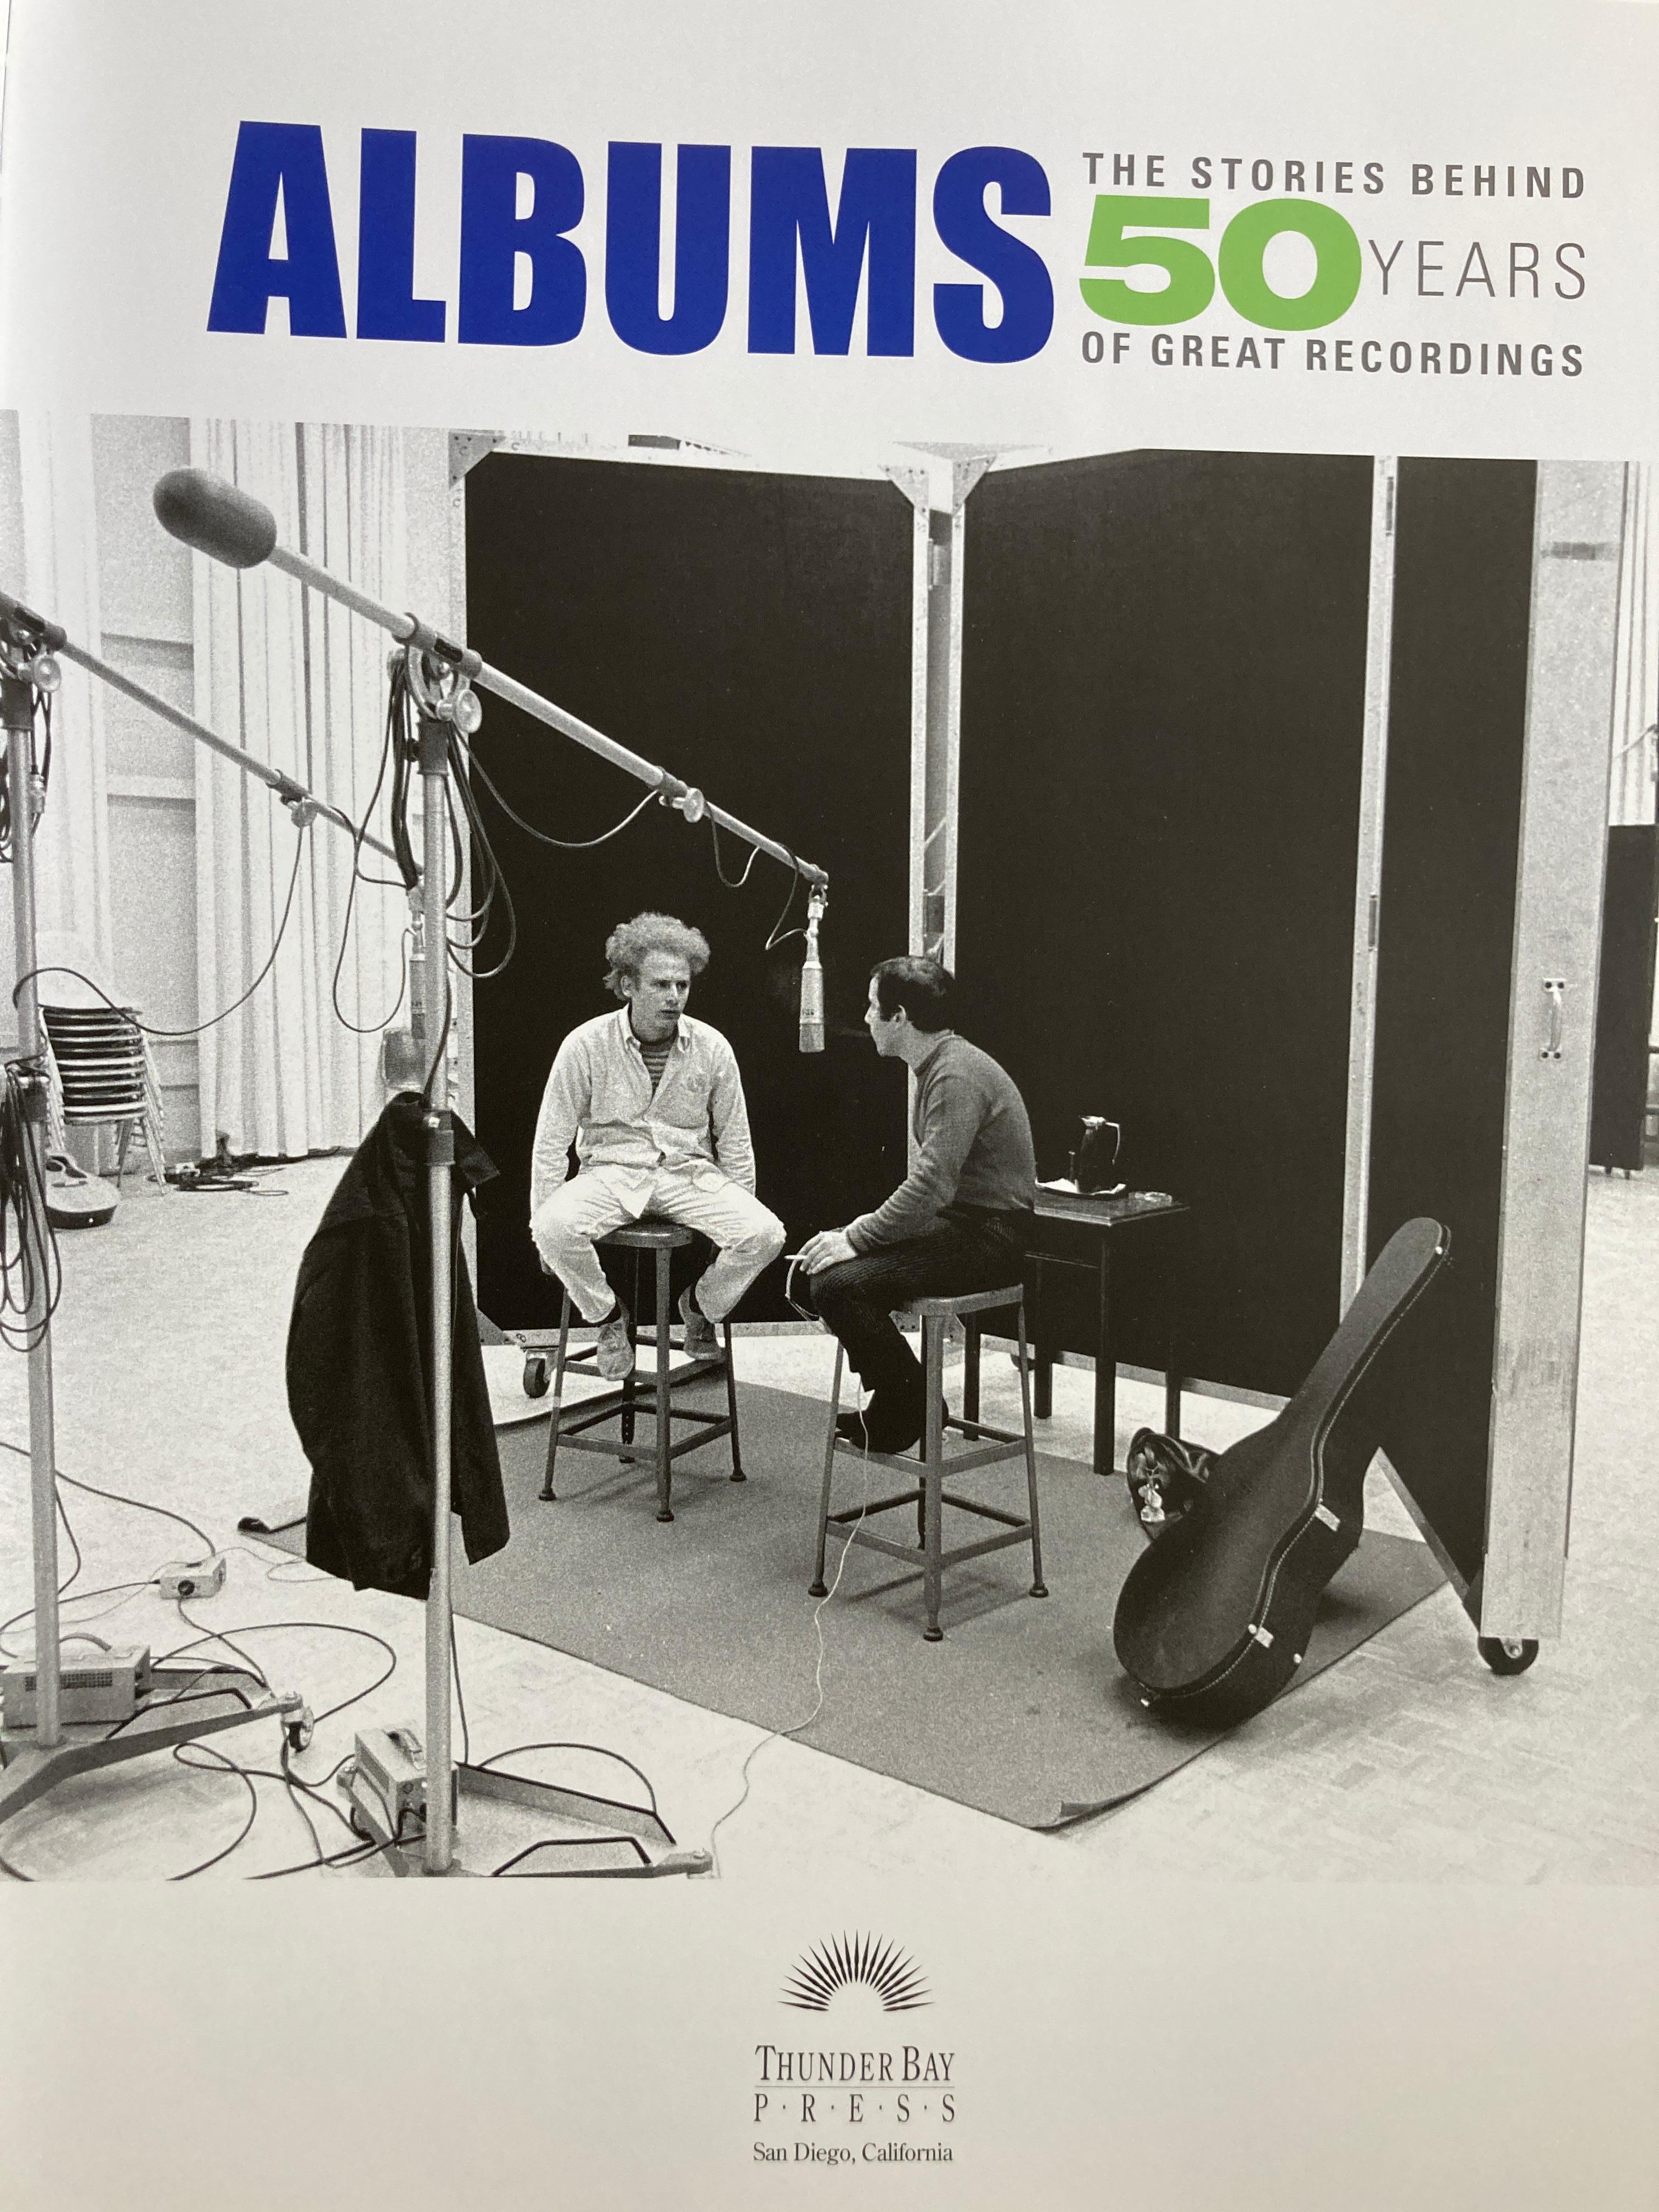 American The Stories Behind 50 Years of Great Recordings Hardcover Table Book